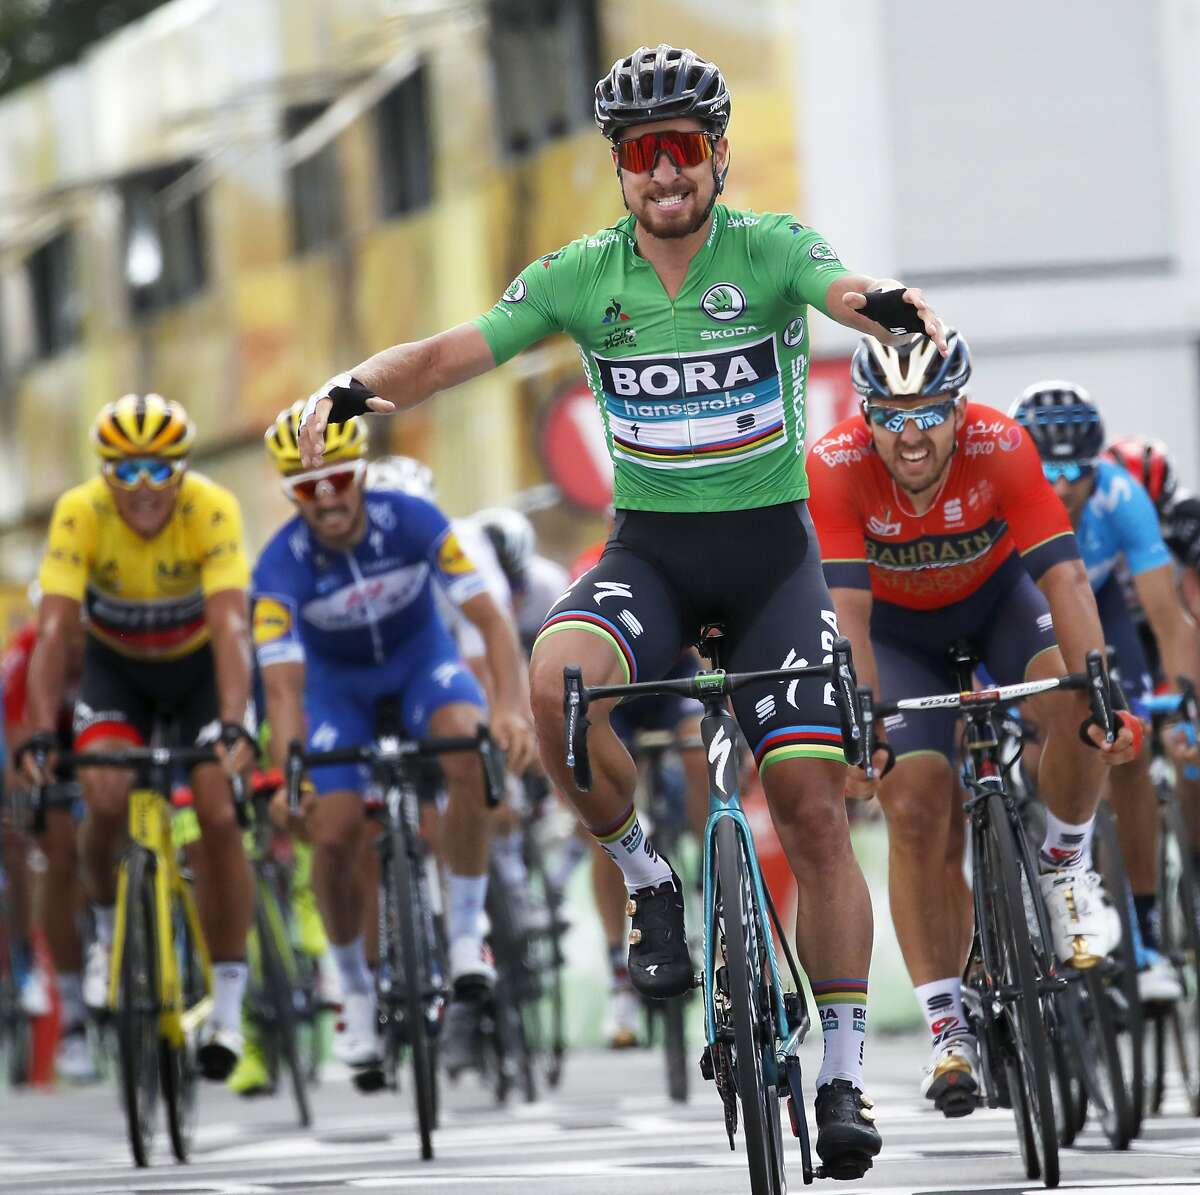 Slovakia's Peter Sagan, wearing the best sprinter's green jersey, crosses the finish line ahead of Italy's Sonny Colbrelli, second right, Belgium's Philippe Gilbert, second left, and Belgium's Greg van Avermaet, left, to win the fifth stage of the Tour de France cycling race over 204.5 kilometers (127 miles) with start in Lorient and finish in Quimper, France, Wednesday, July 11, 2018. (AP Photo/Christophe Ena)